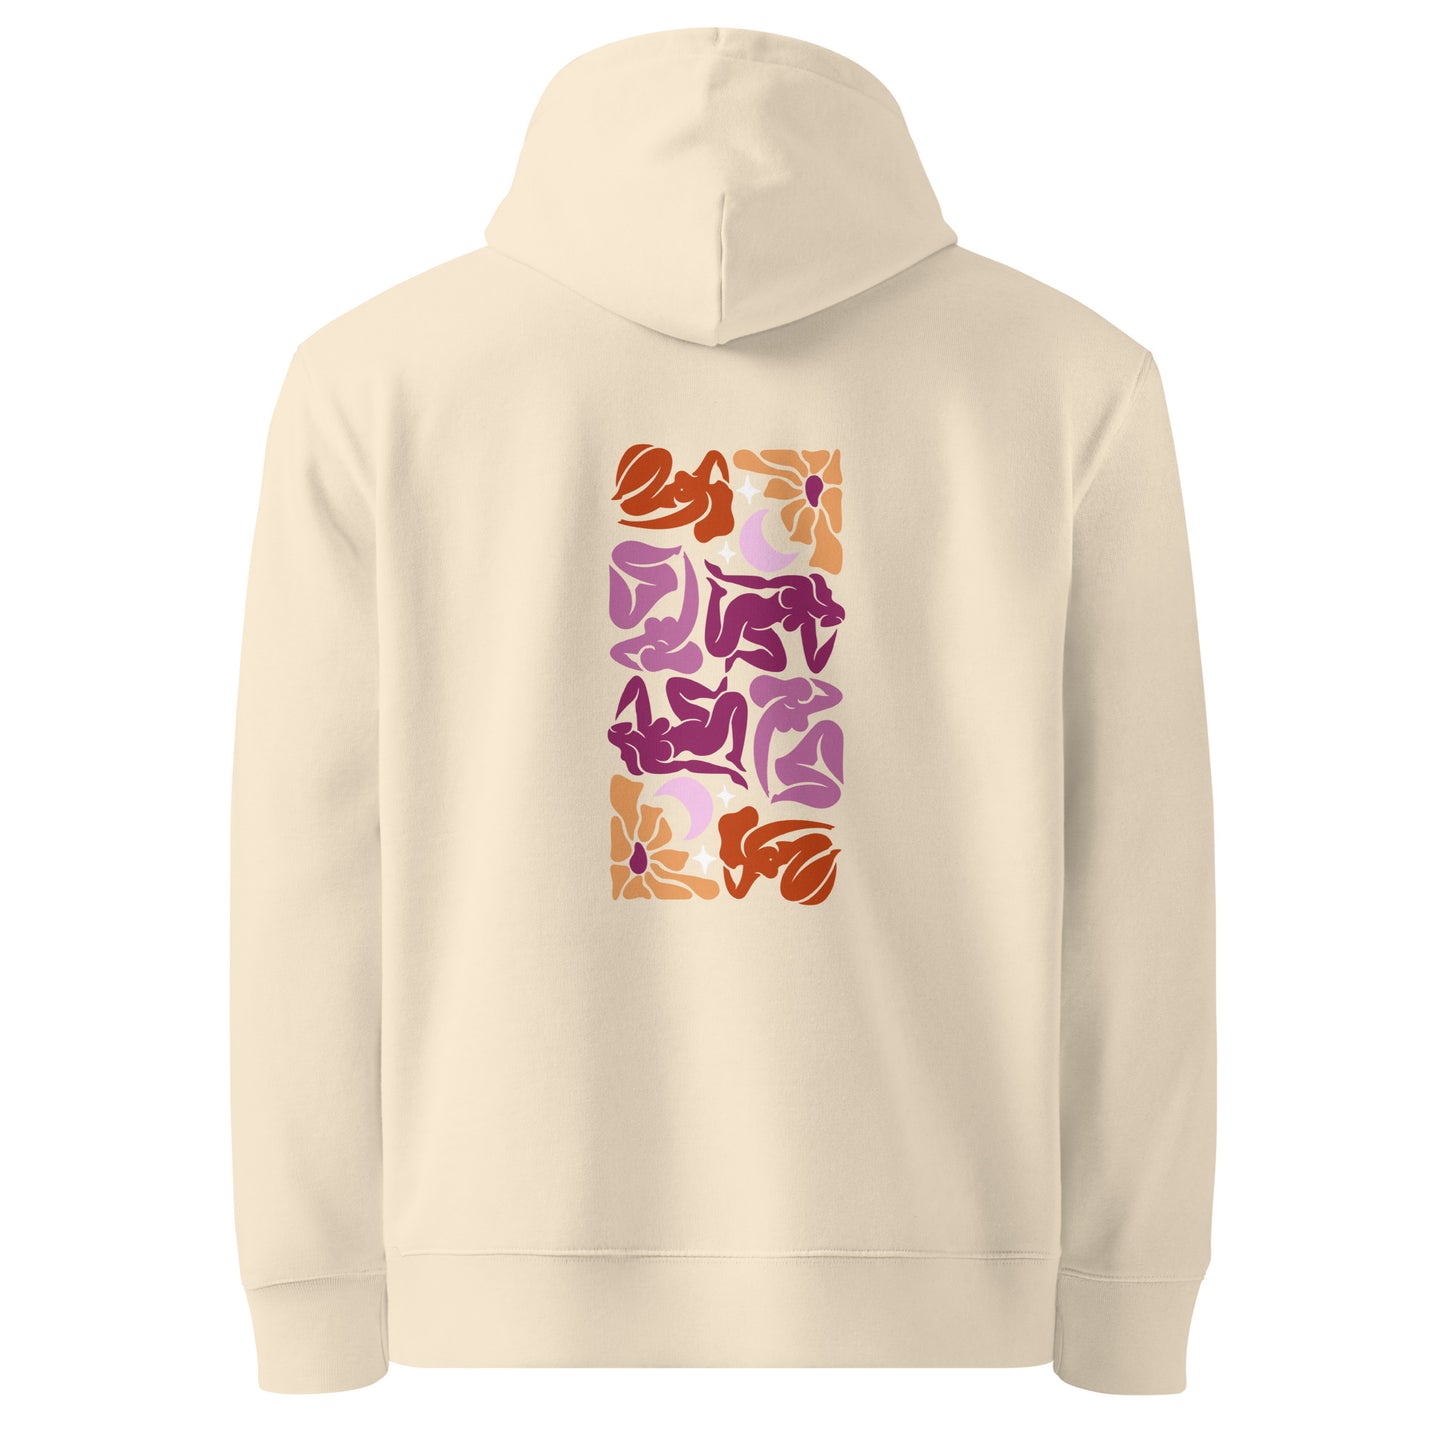 Unisex eco-friendly desert dust hoodie featuring an embroidered Matisse mosaic-inspired design centered chest in lesbian colors, with the same design printed large on the back  - adding a touch of lgbtq to your outfit. sizes: small, medium, large, extra large, double extra large.